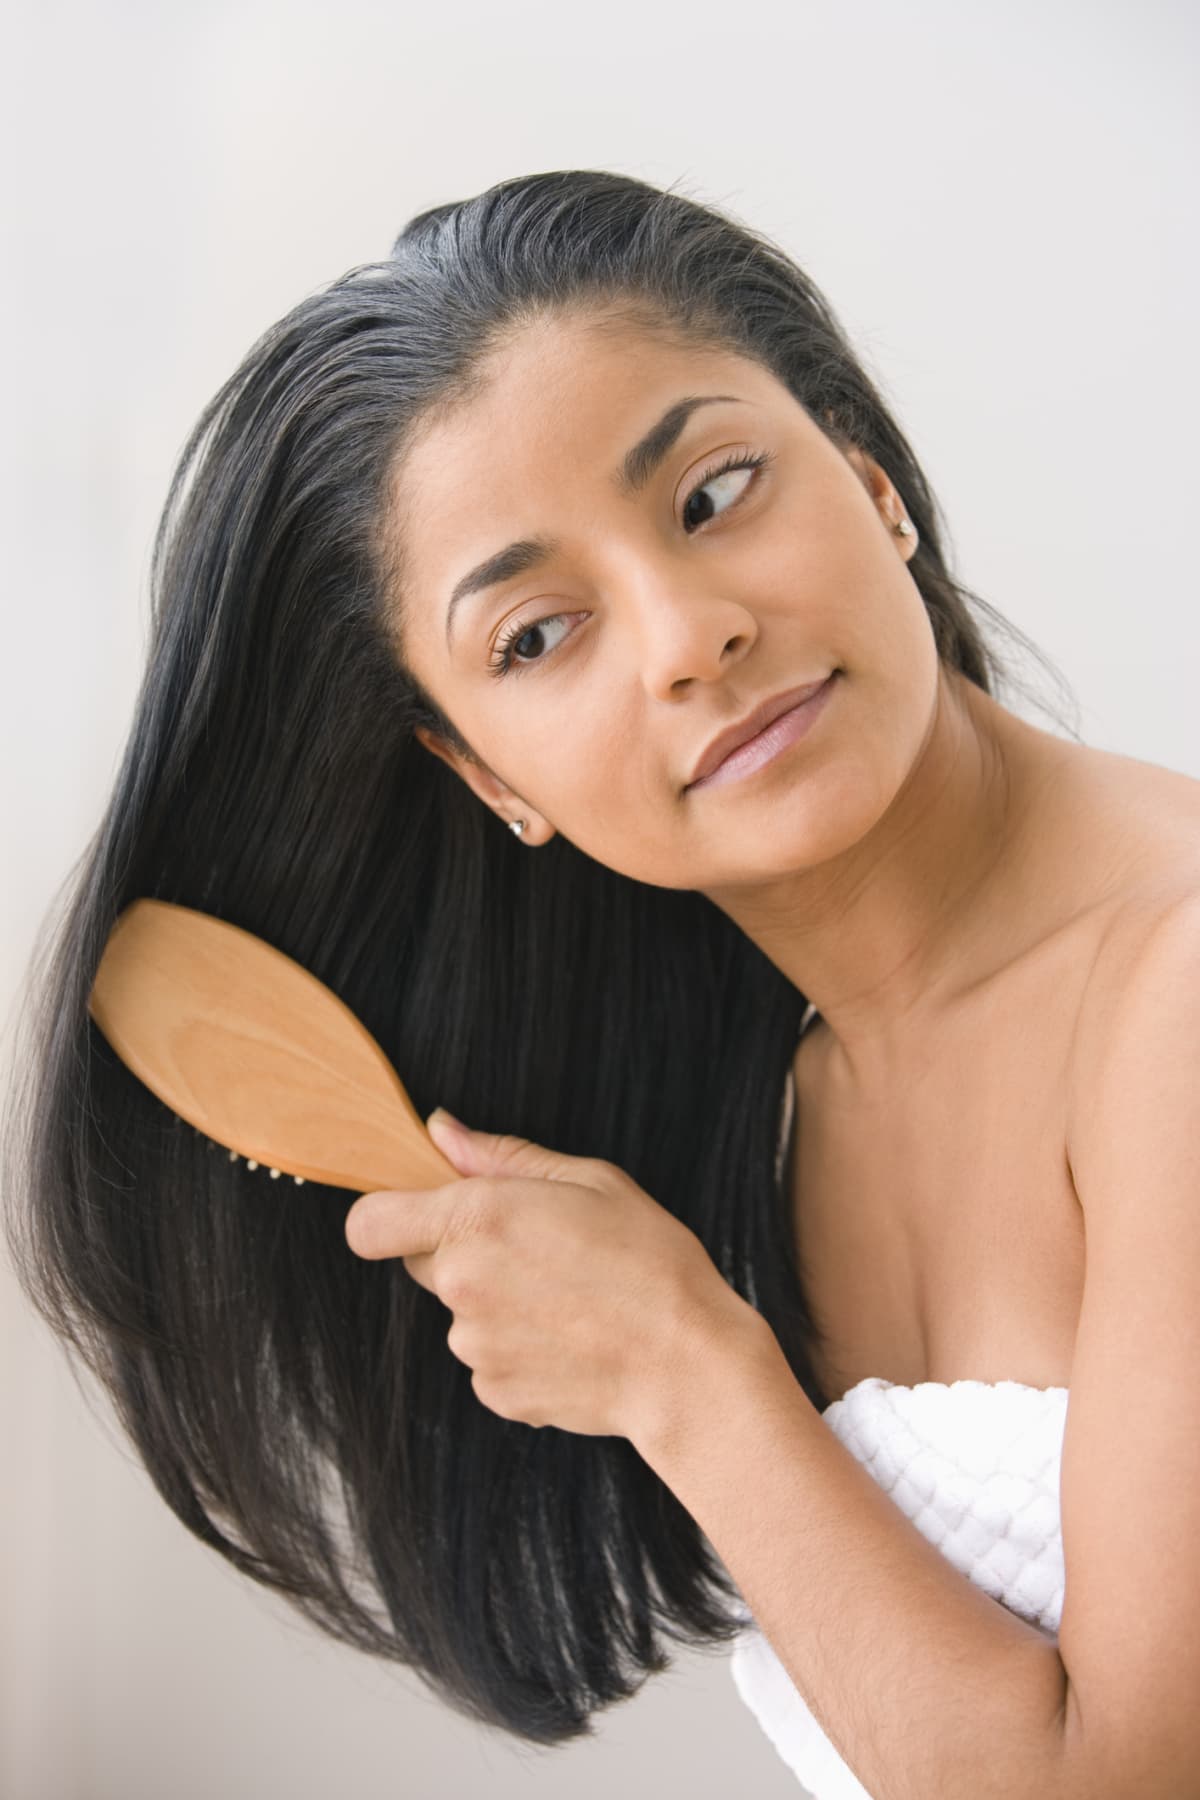 a woman brushing her hair